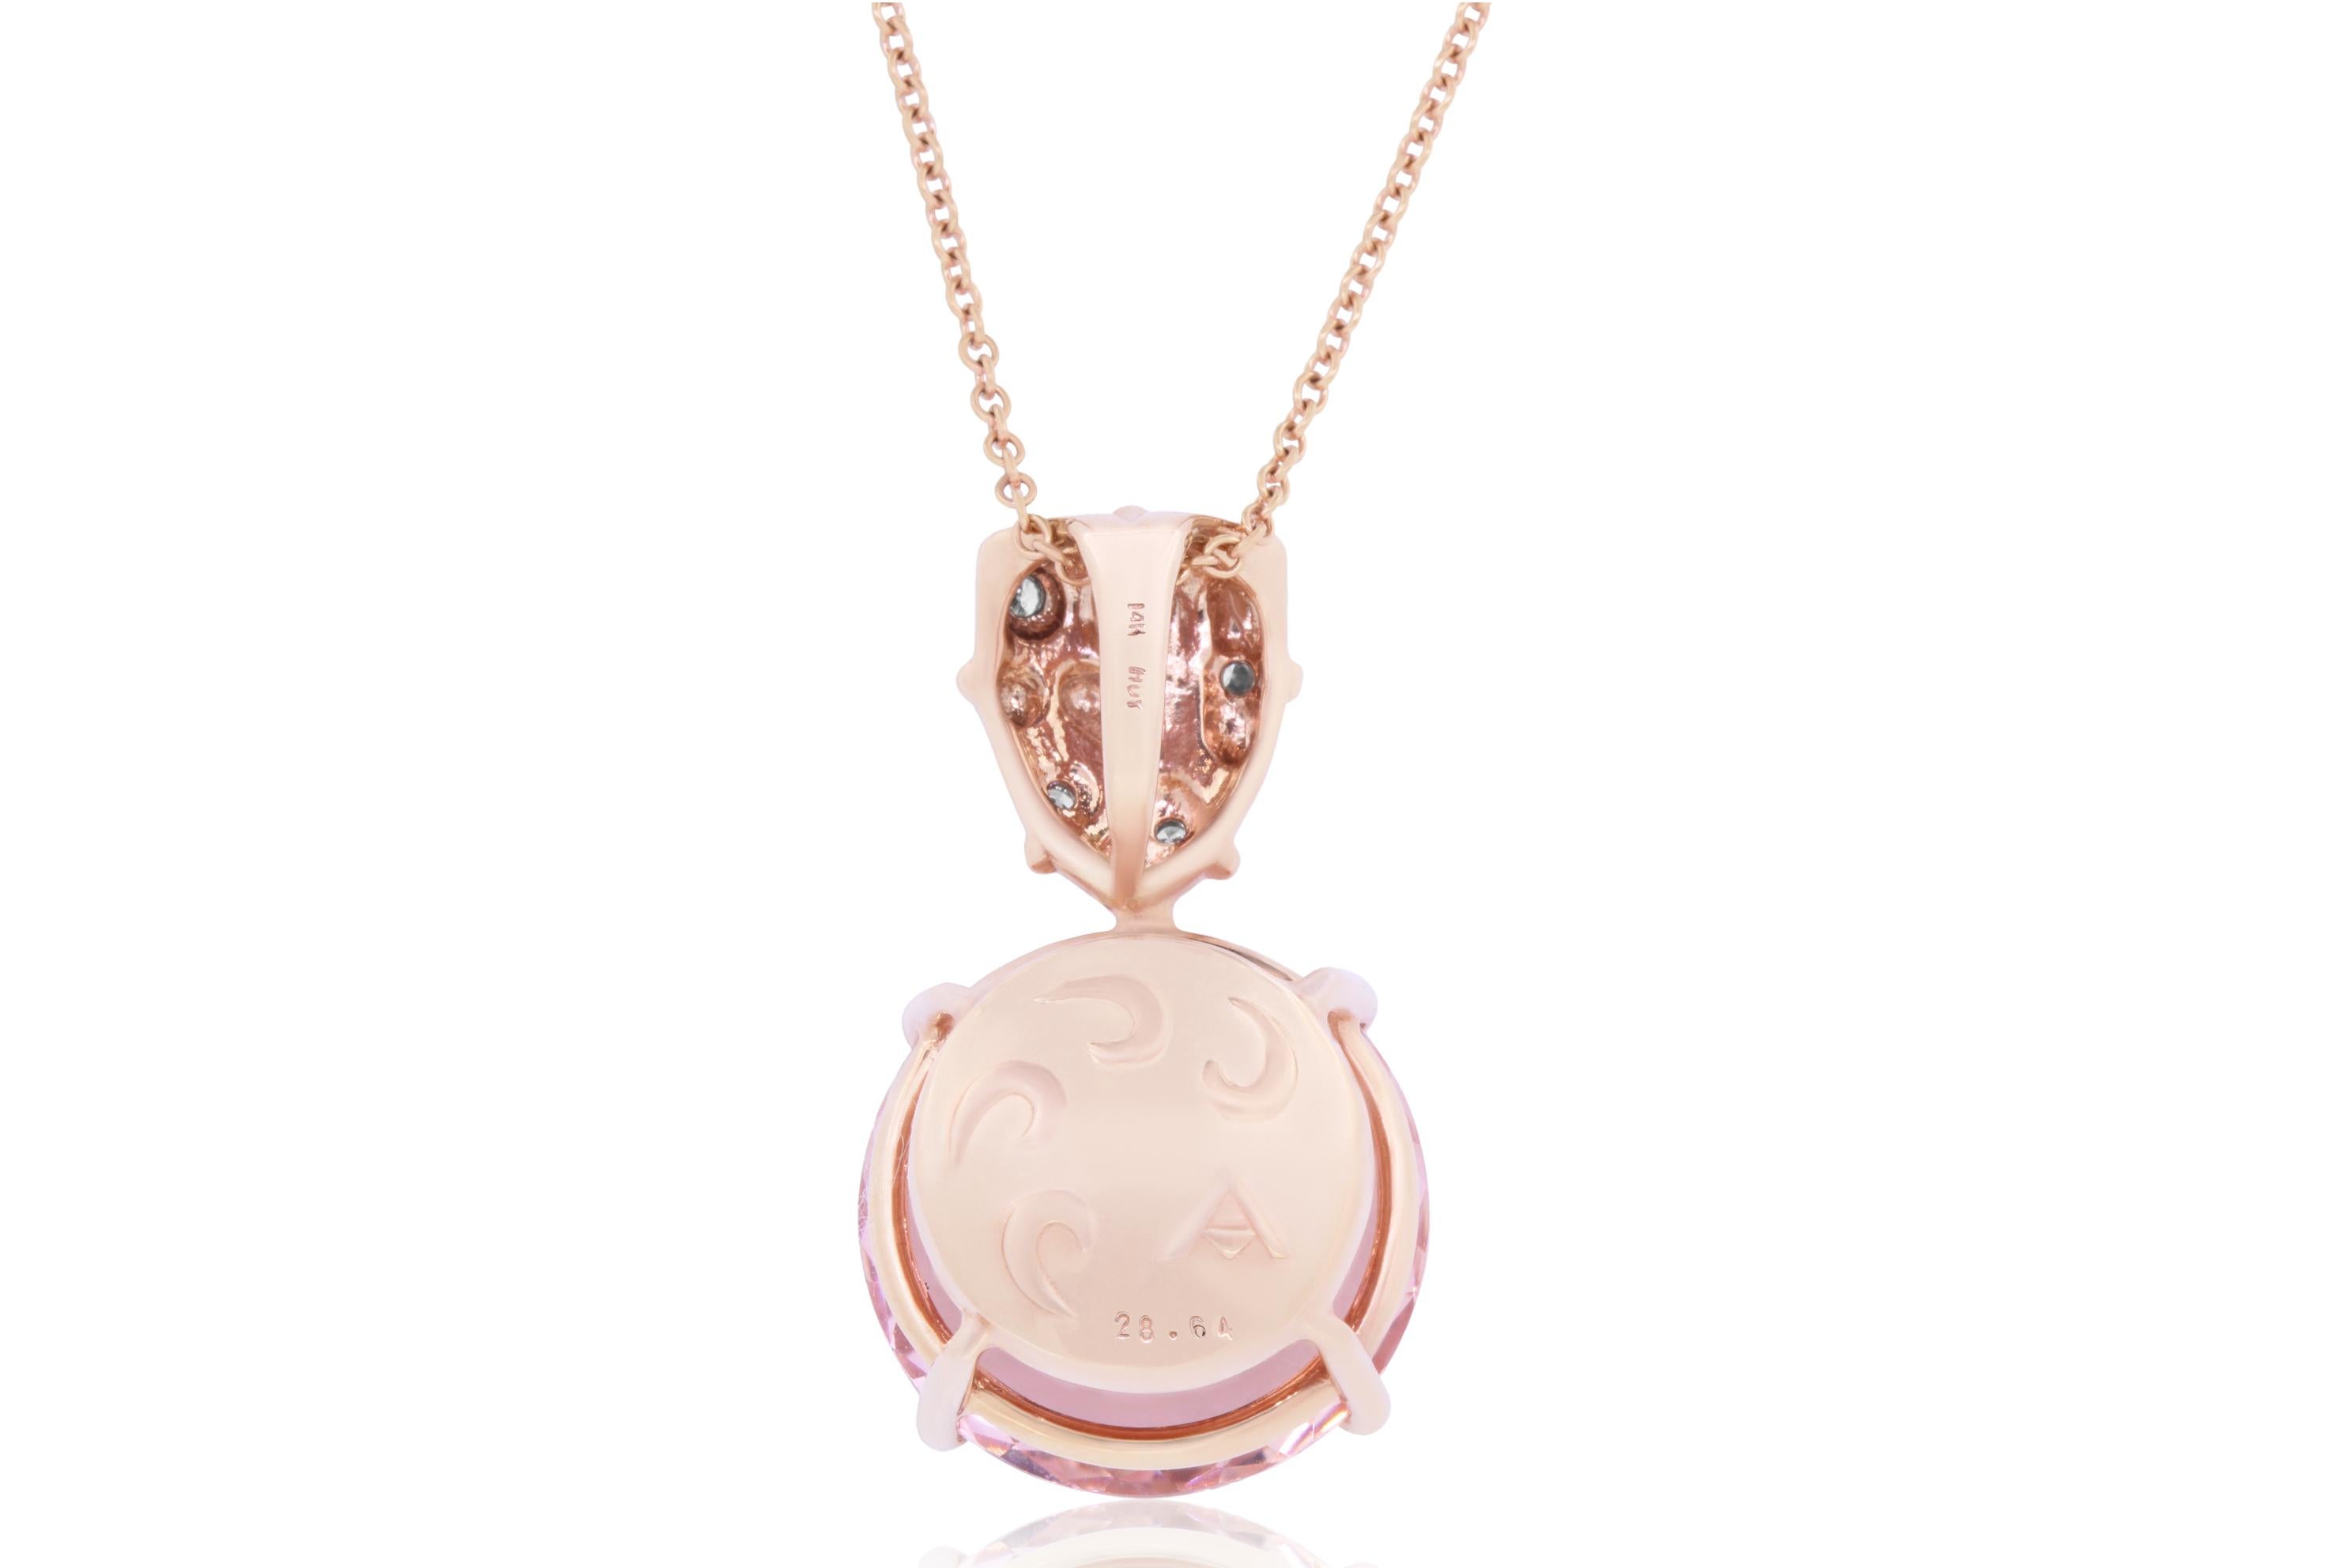 A stunning piece, this pendant features a round pink morganite set in 14K Rose gold and adorned with 6 dazzling diamonds. 

Material: 14k Rose Gold 
Center Stone Details: 28.64 Carat Roun Cut Morganite 6.7 x 8.7 mm
Mounting Stone Details: 6